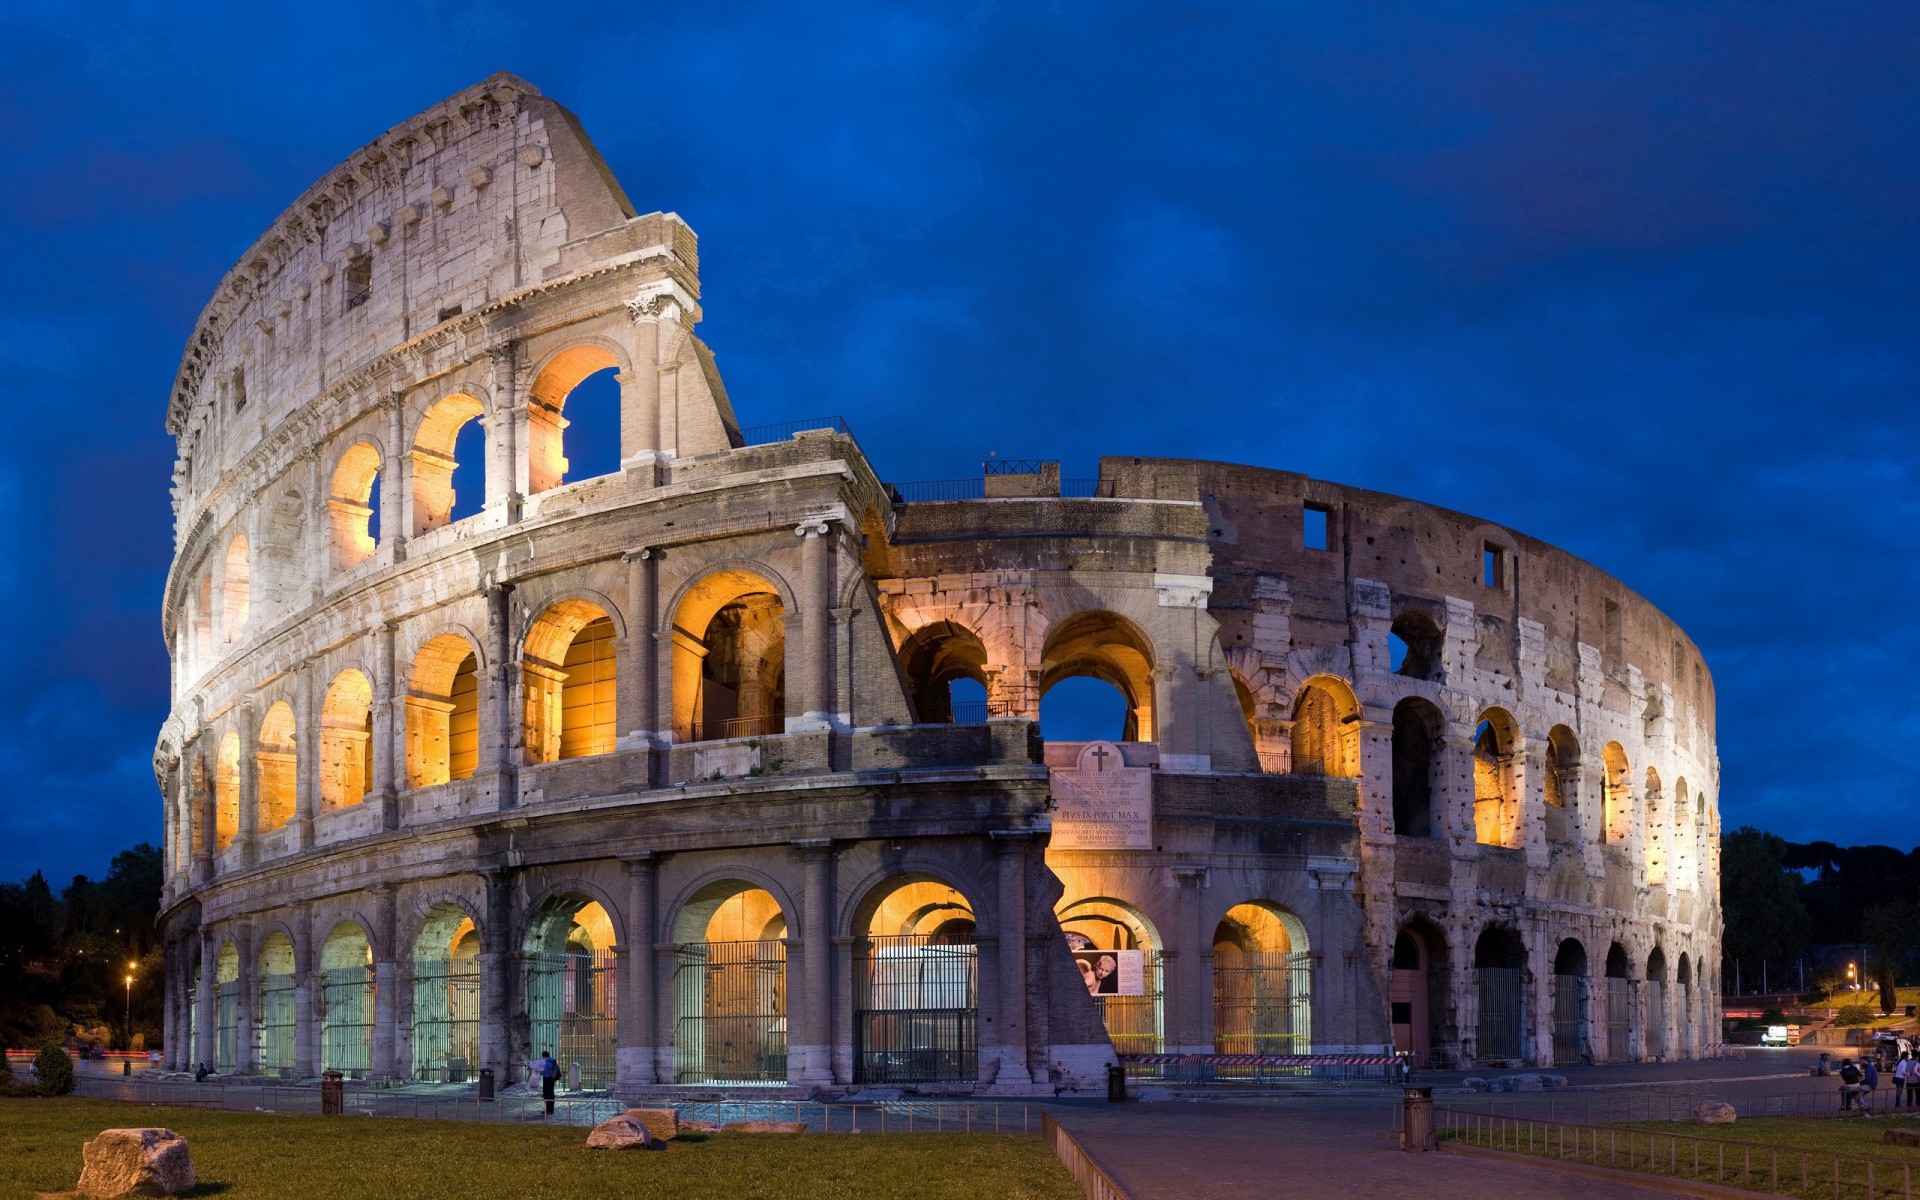 italy architecture colosseum amphitheater stadium travel ancient gladiator building sky old landmark monument arch tourism assembly outdoors ruin dusk stone gladiators history